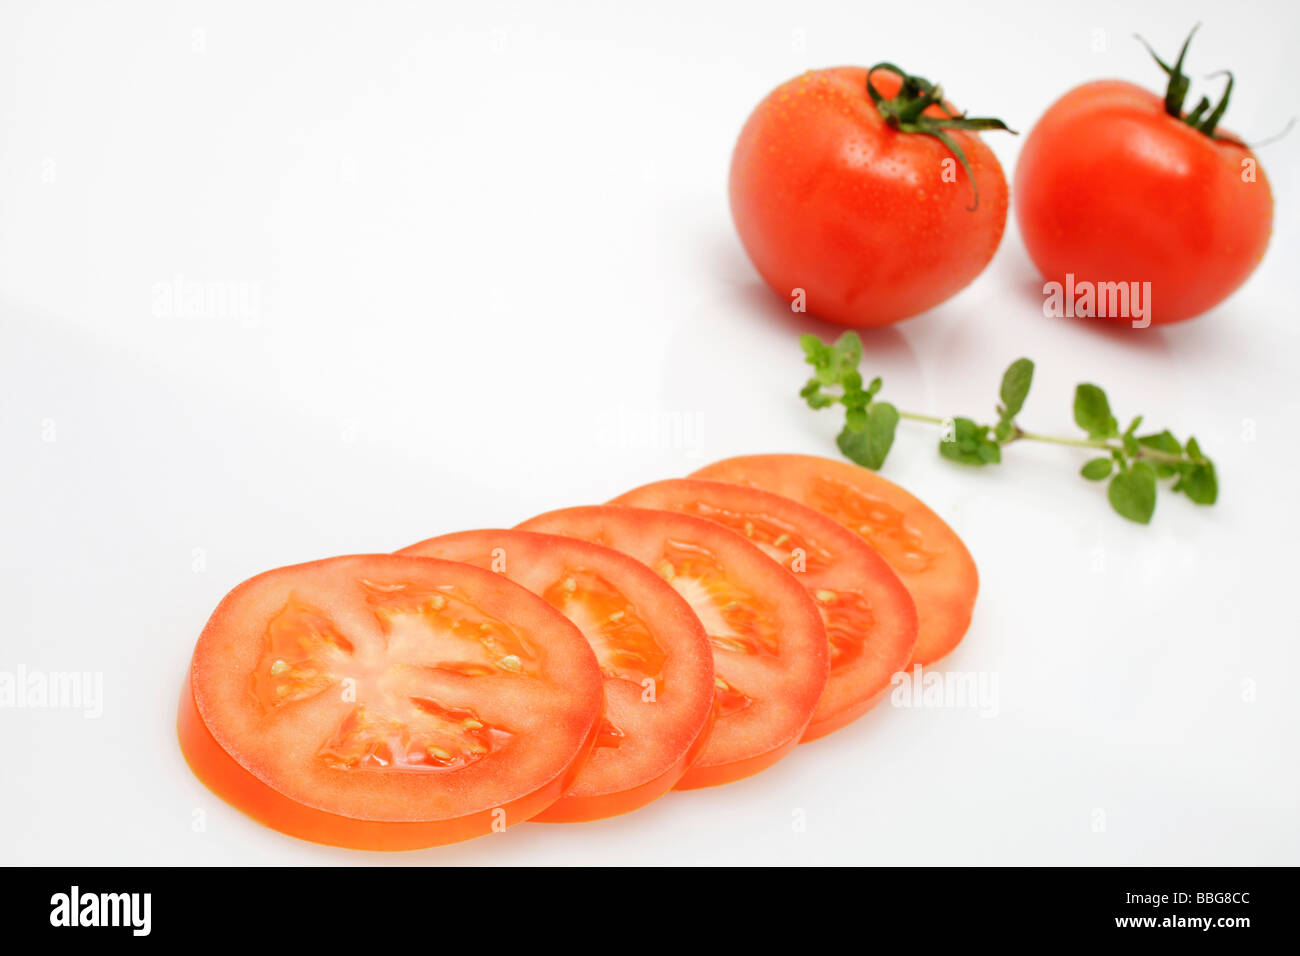 Sliced tomato and whole tomatoes Stock Photo